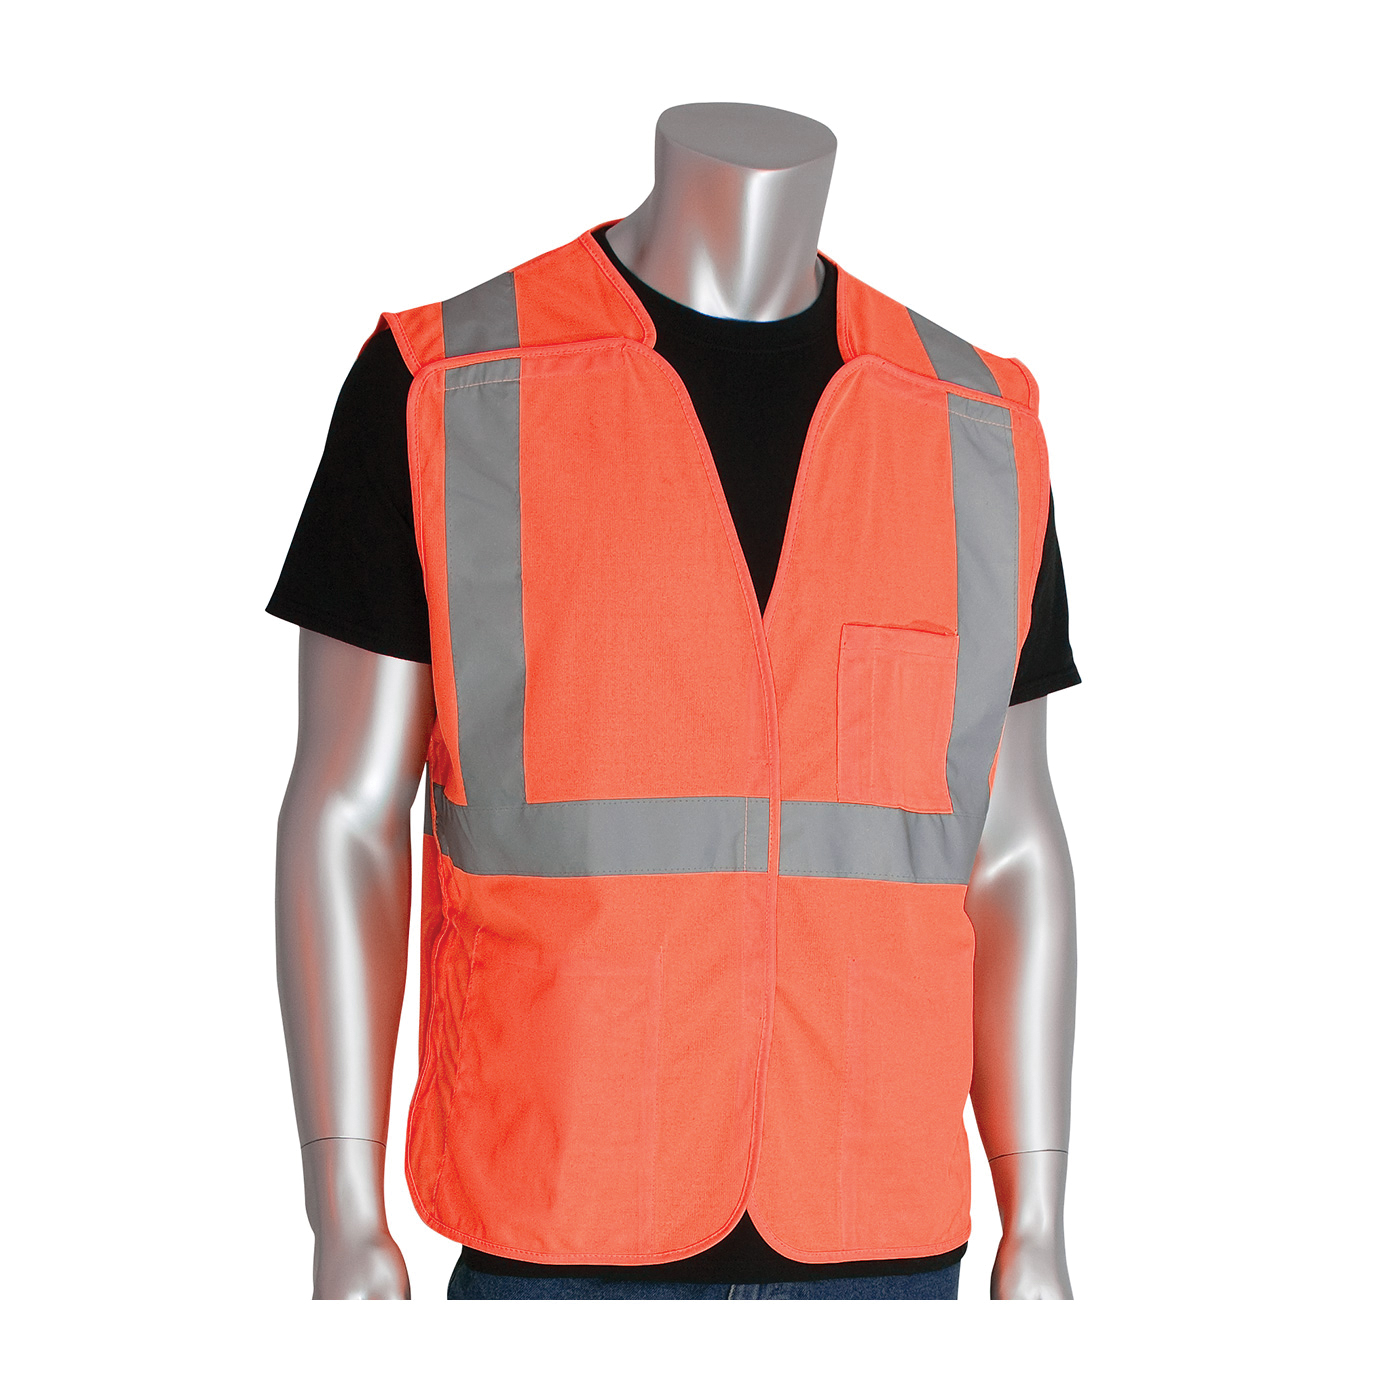 PIP® 302-5PVOR-5X Safety Vest, 5XL, Hi-Viz Orange, Polyester, Hook and Loop Closure, 3 Pockets, ANSI Class: Class 2, Specifications Met: ANSI 107 Type R